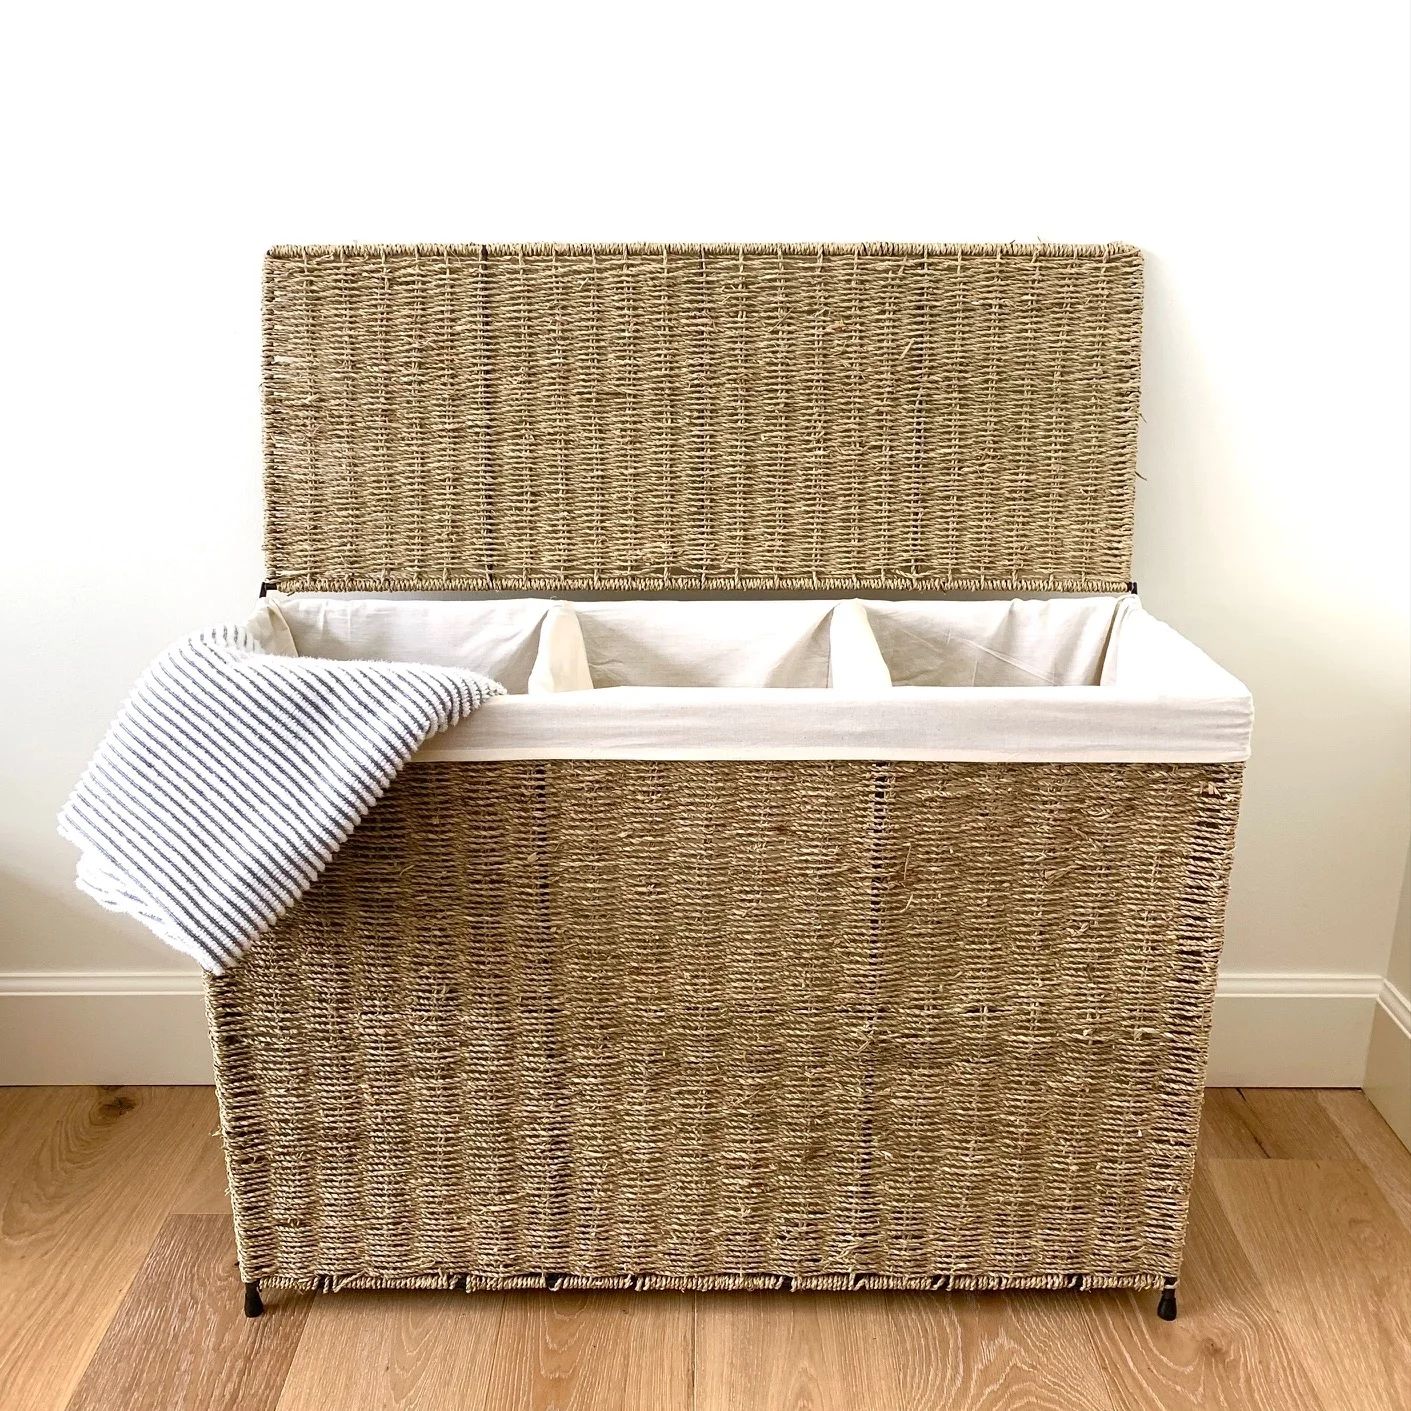 America Basket Company Woven Seagrass Lined 3-section Full-load Hamper - Green | Bed Bath & Beyond